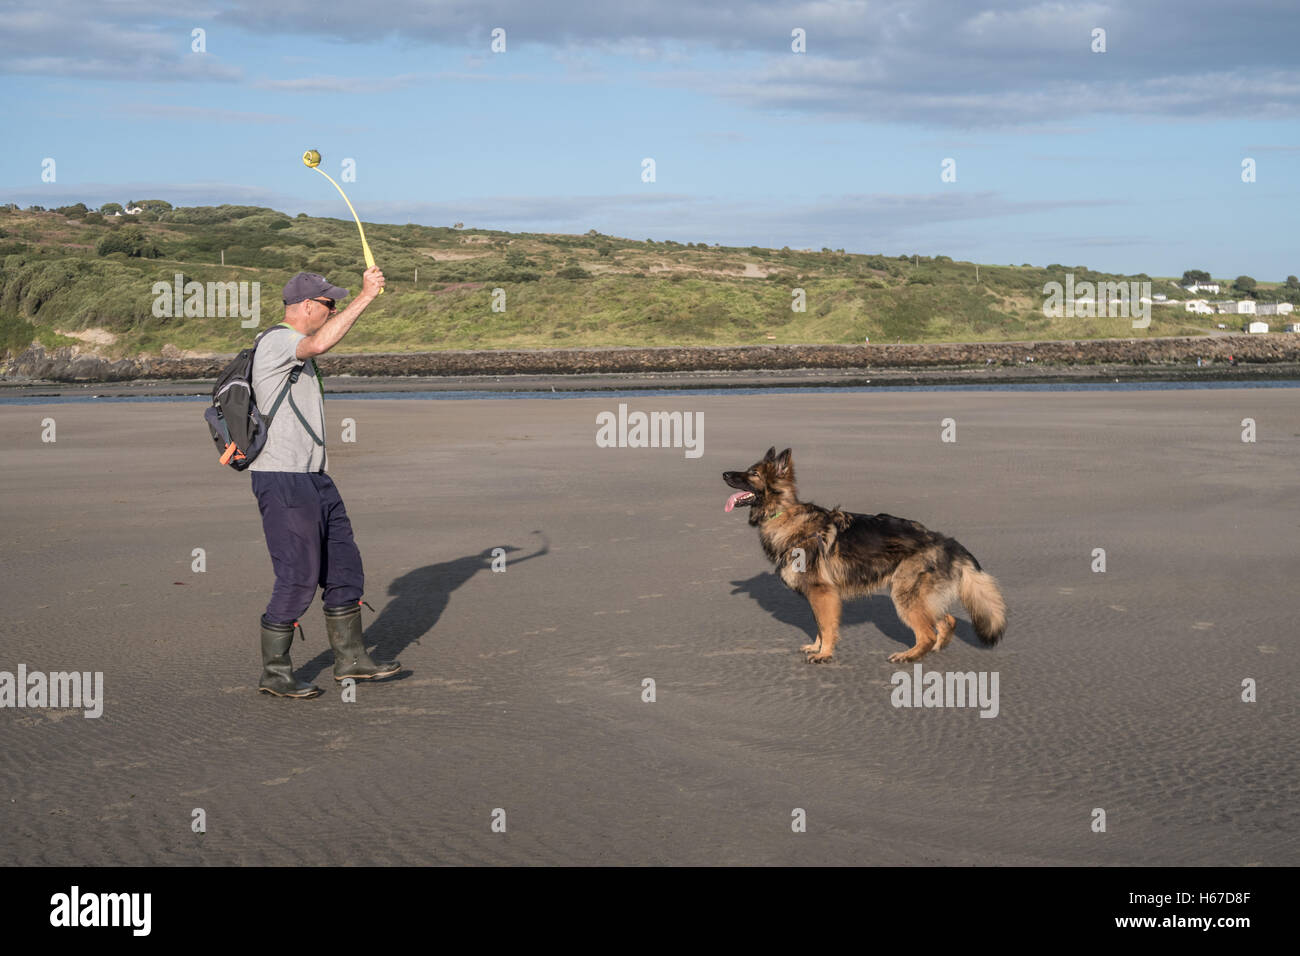 Man throwing a ball for his dog on the beach at Poppit Sands near Cardigan, Wales. They are having fun playing a game together Stock Photo